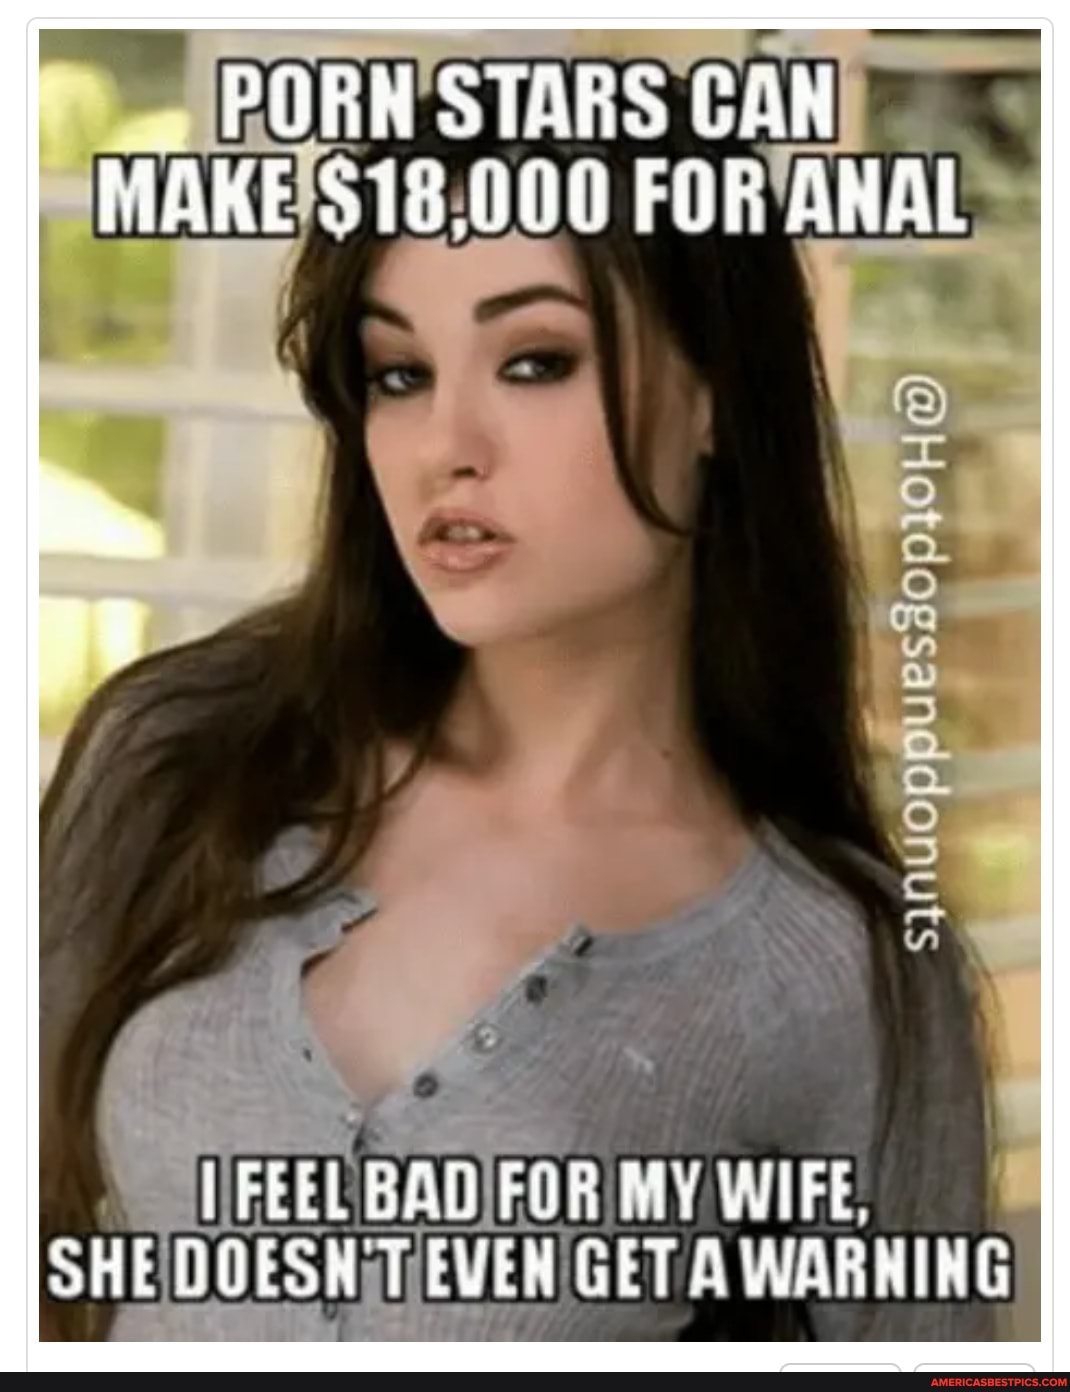 Anal Porn Quotes - PORN STARS CAN MAKE S18.000 FOR ANAL @Ho conuts FEEL BAT FOR AYY SHE QOESH  T EVEN GET AA WARNING - America's best pics and videos